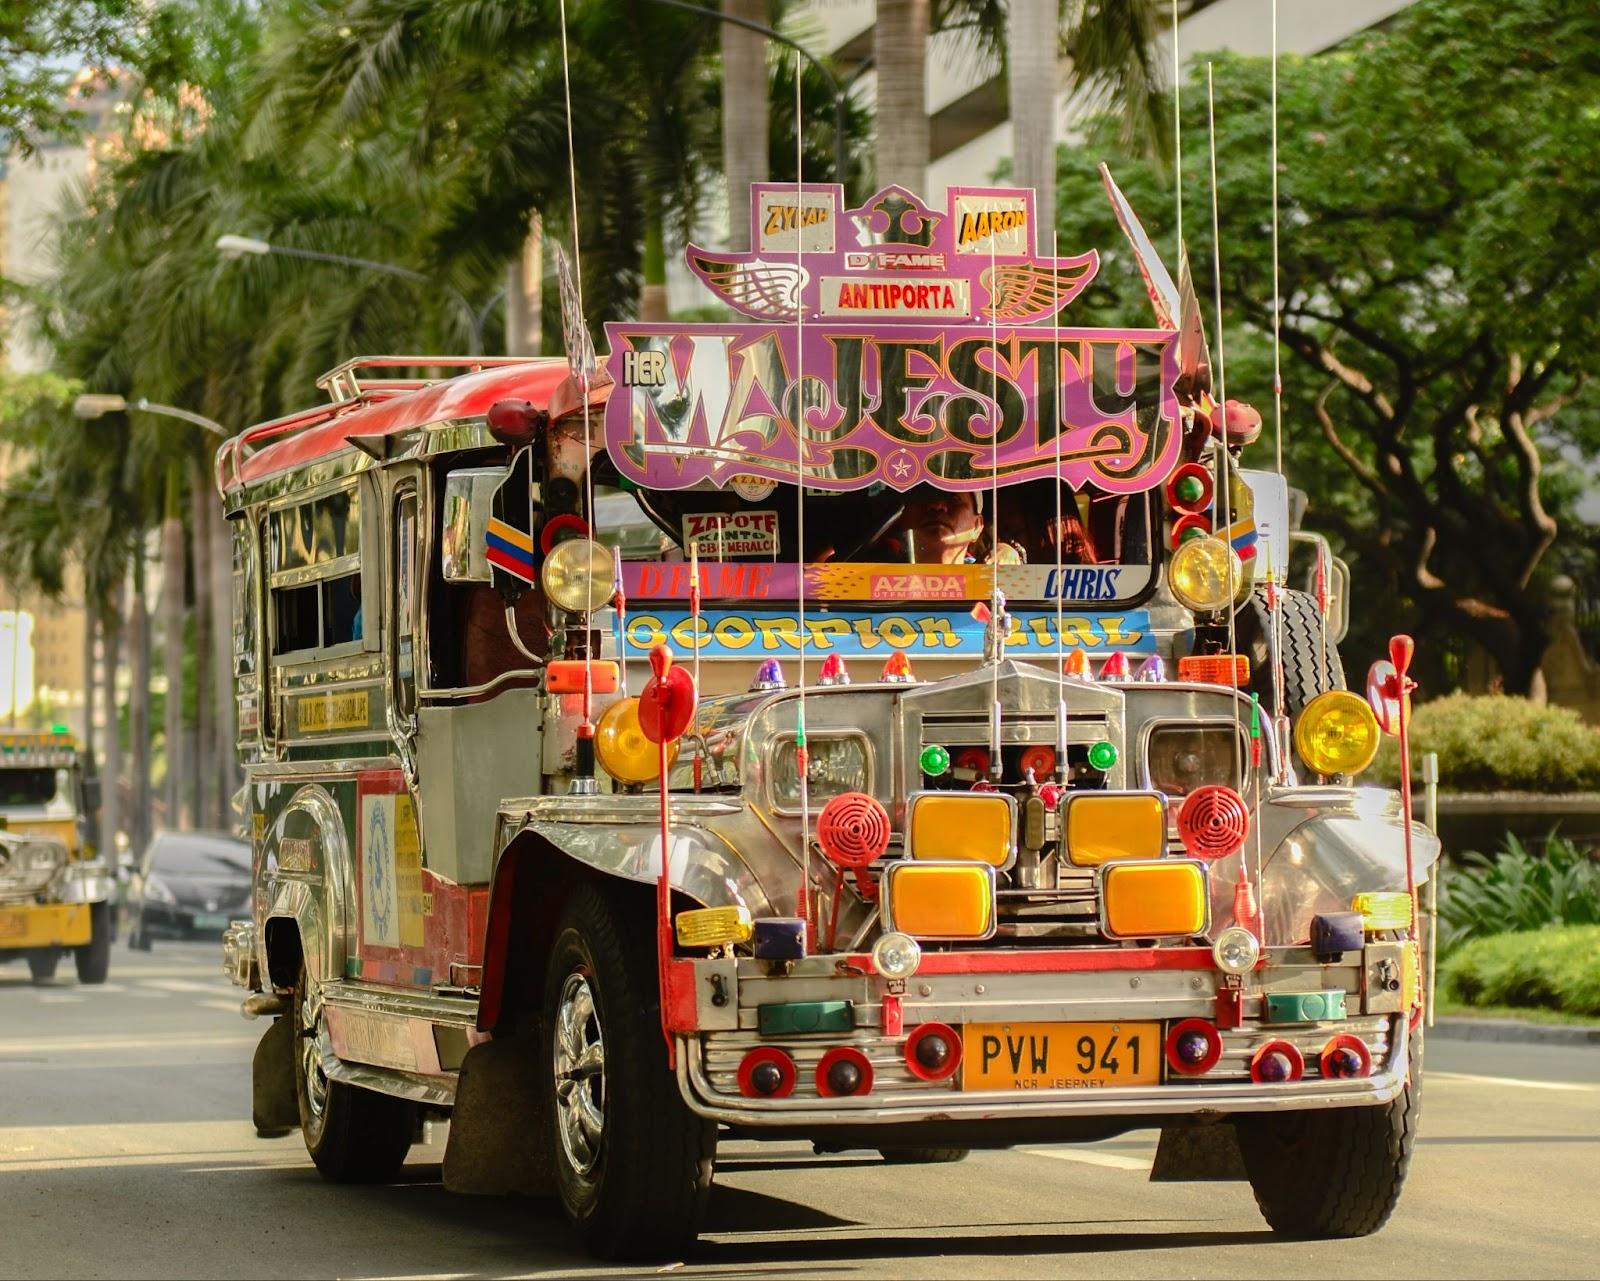 Jeepneys are popular public transportation in the Philippines